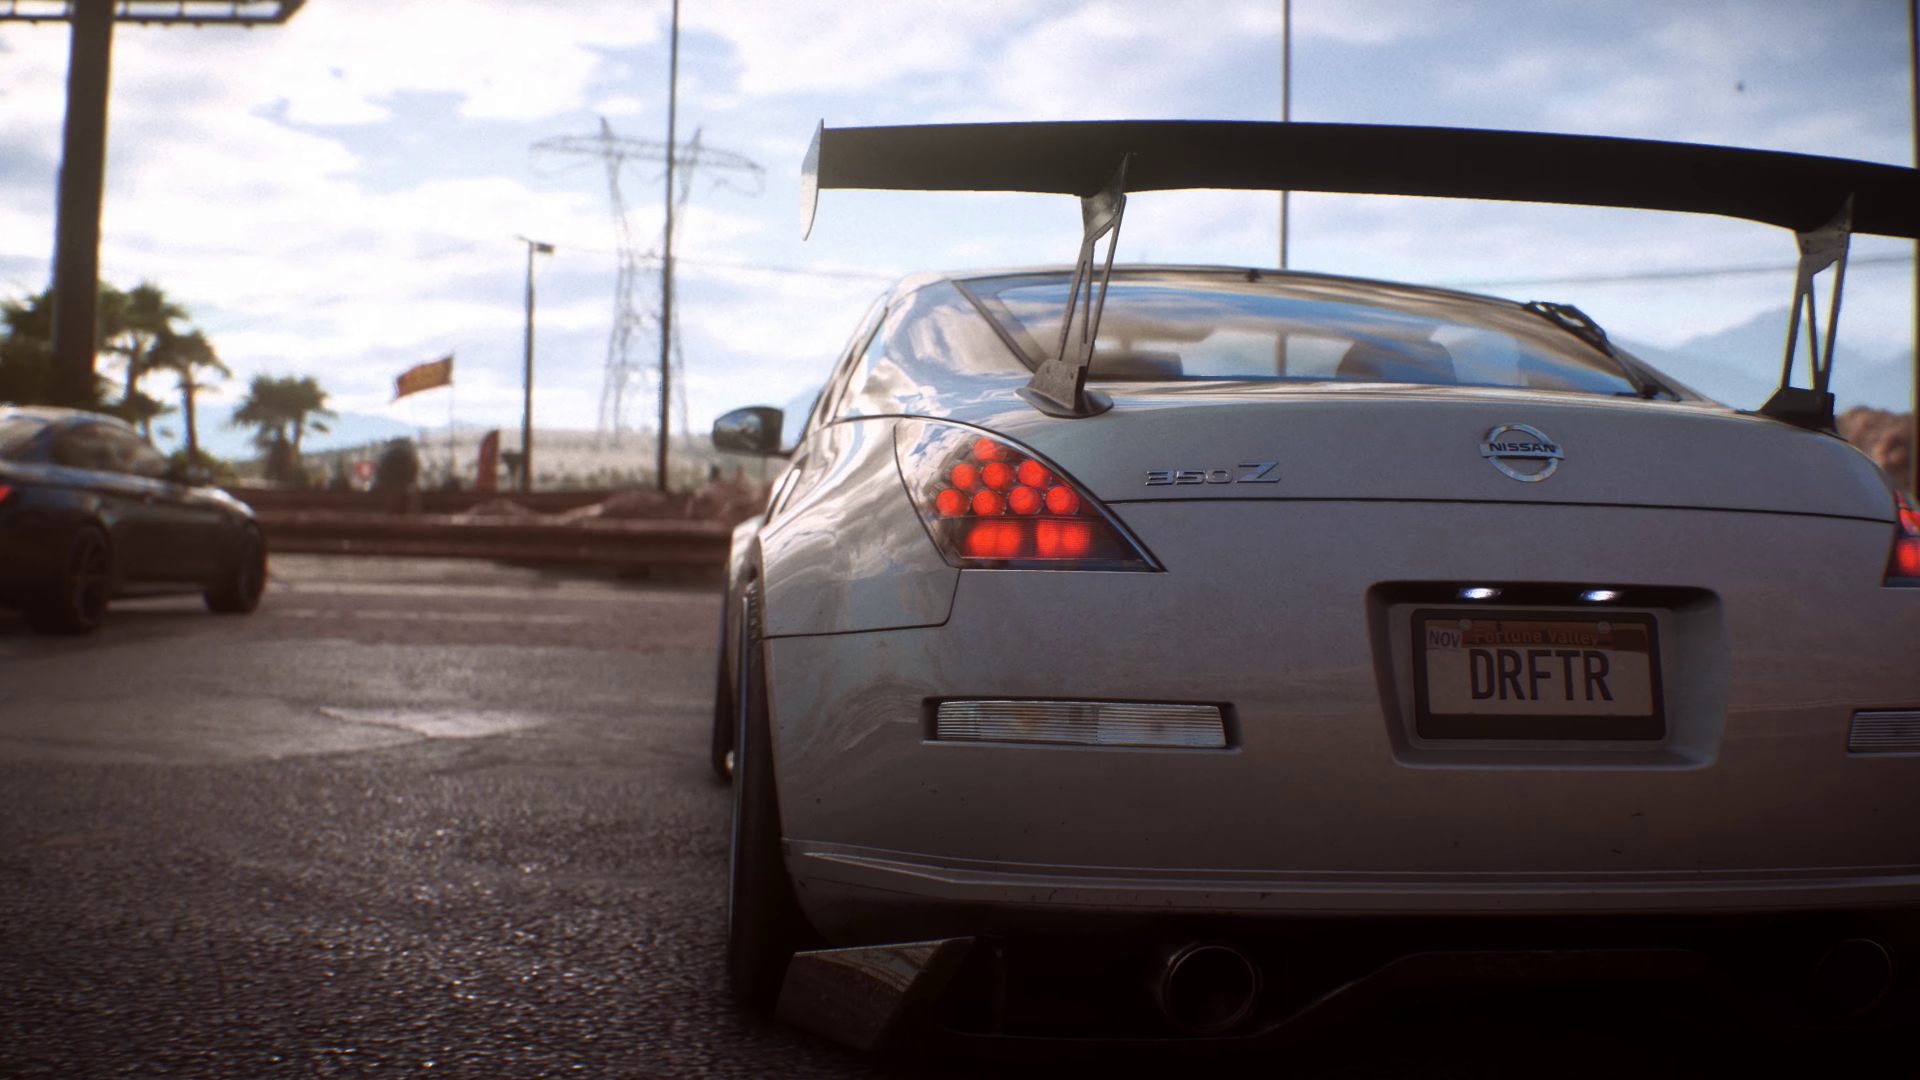 Car Need For Speed Need For Speed Payback Nissan Nissan 350z 1920x1080